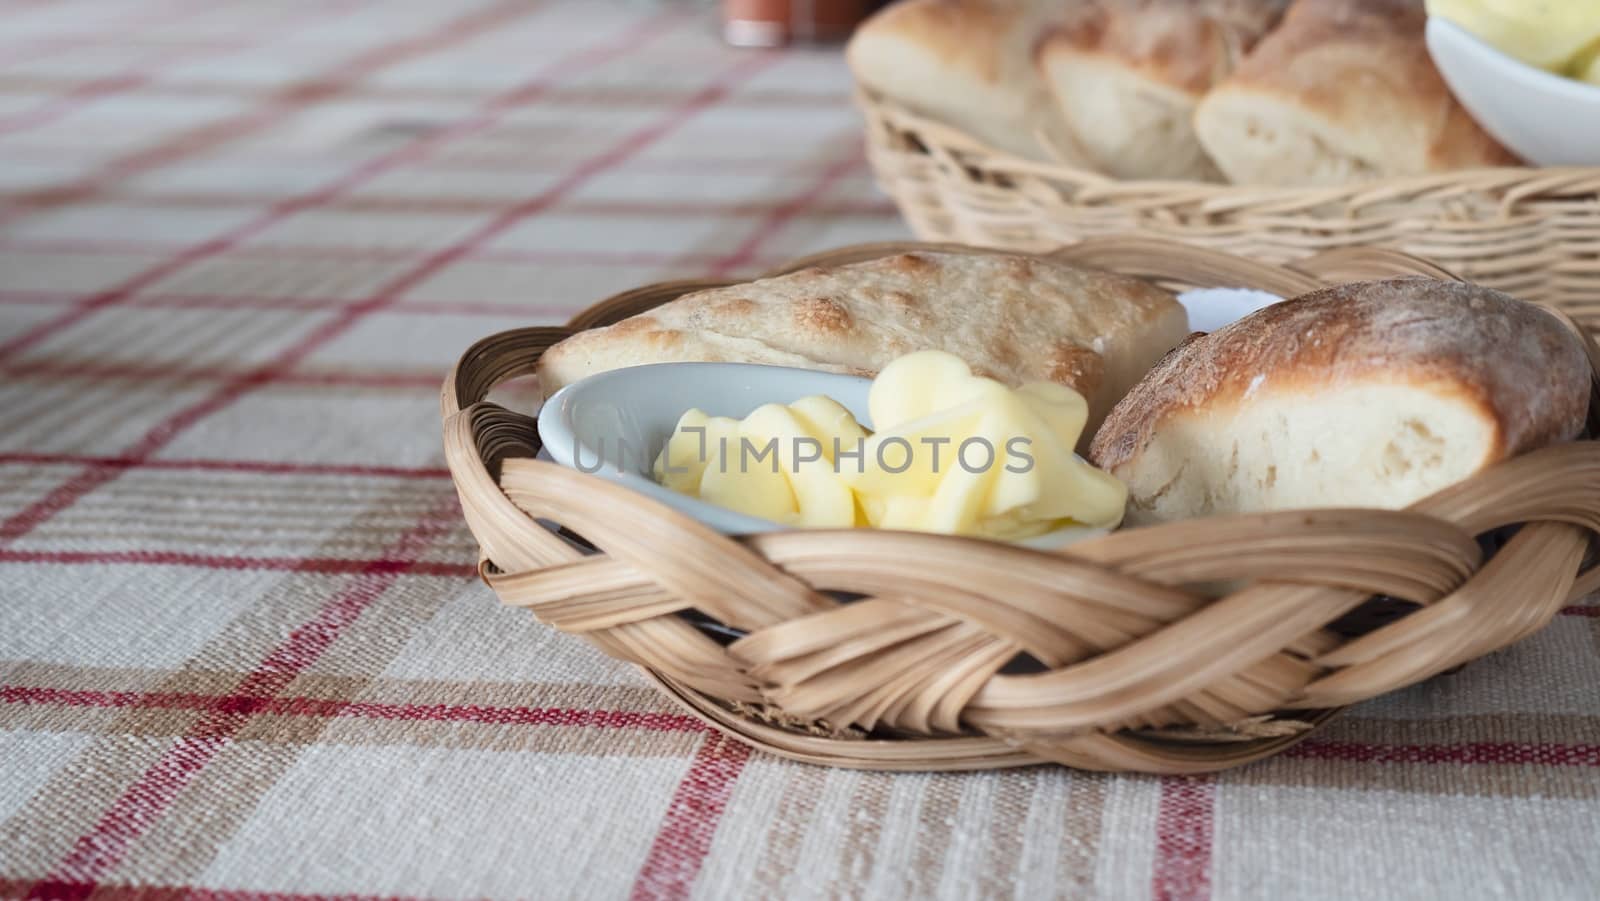 Bread with butter appetizer recipes - bread appetizer served before main course for background use by pairhandmade